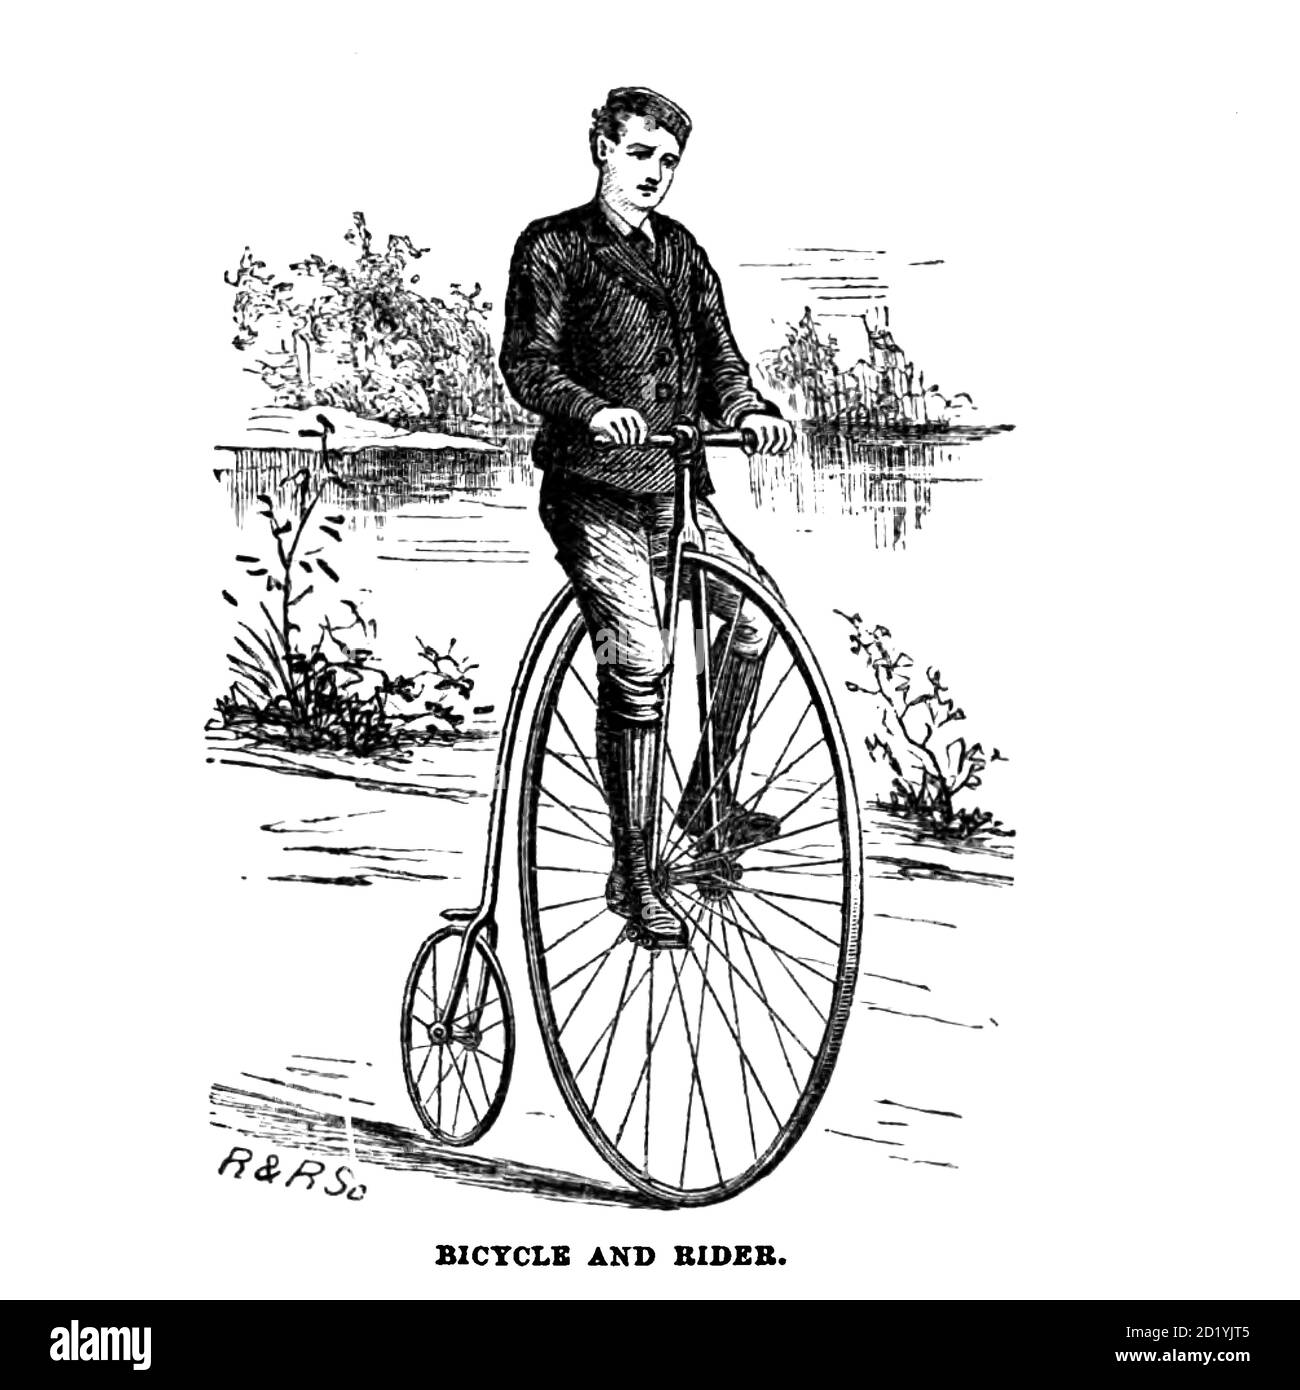 The American bicycler: a manual for the observer, the learner, and the expert by Pratt, Charles E. (Charles Eadward), 1845-1898. Publication date 1879. Publisher Boston, Houghton, Osgood and company Stock Photo